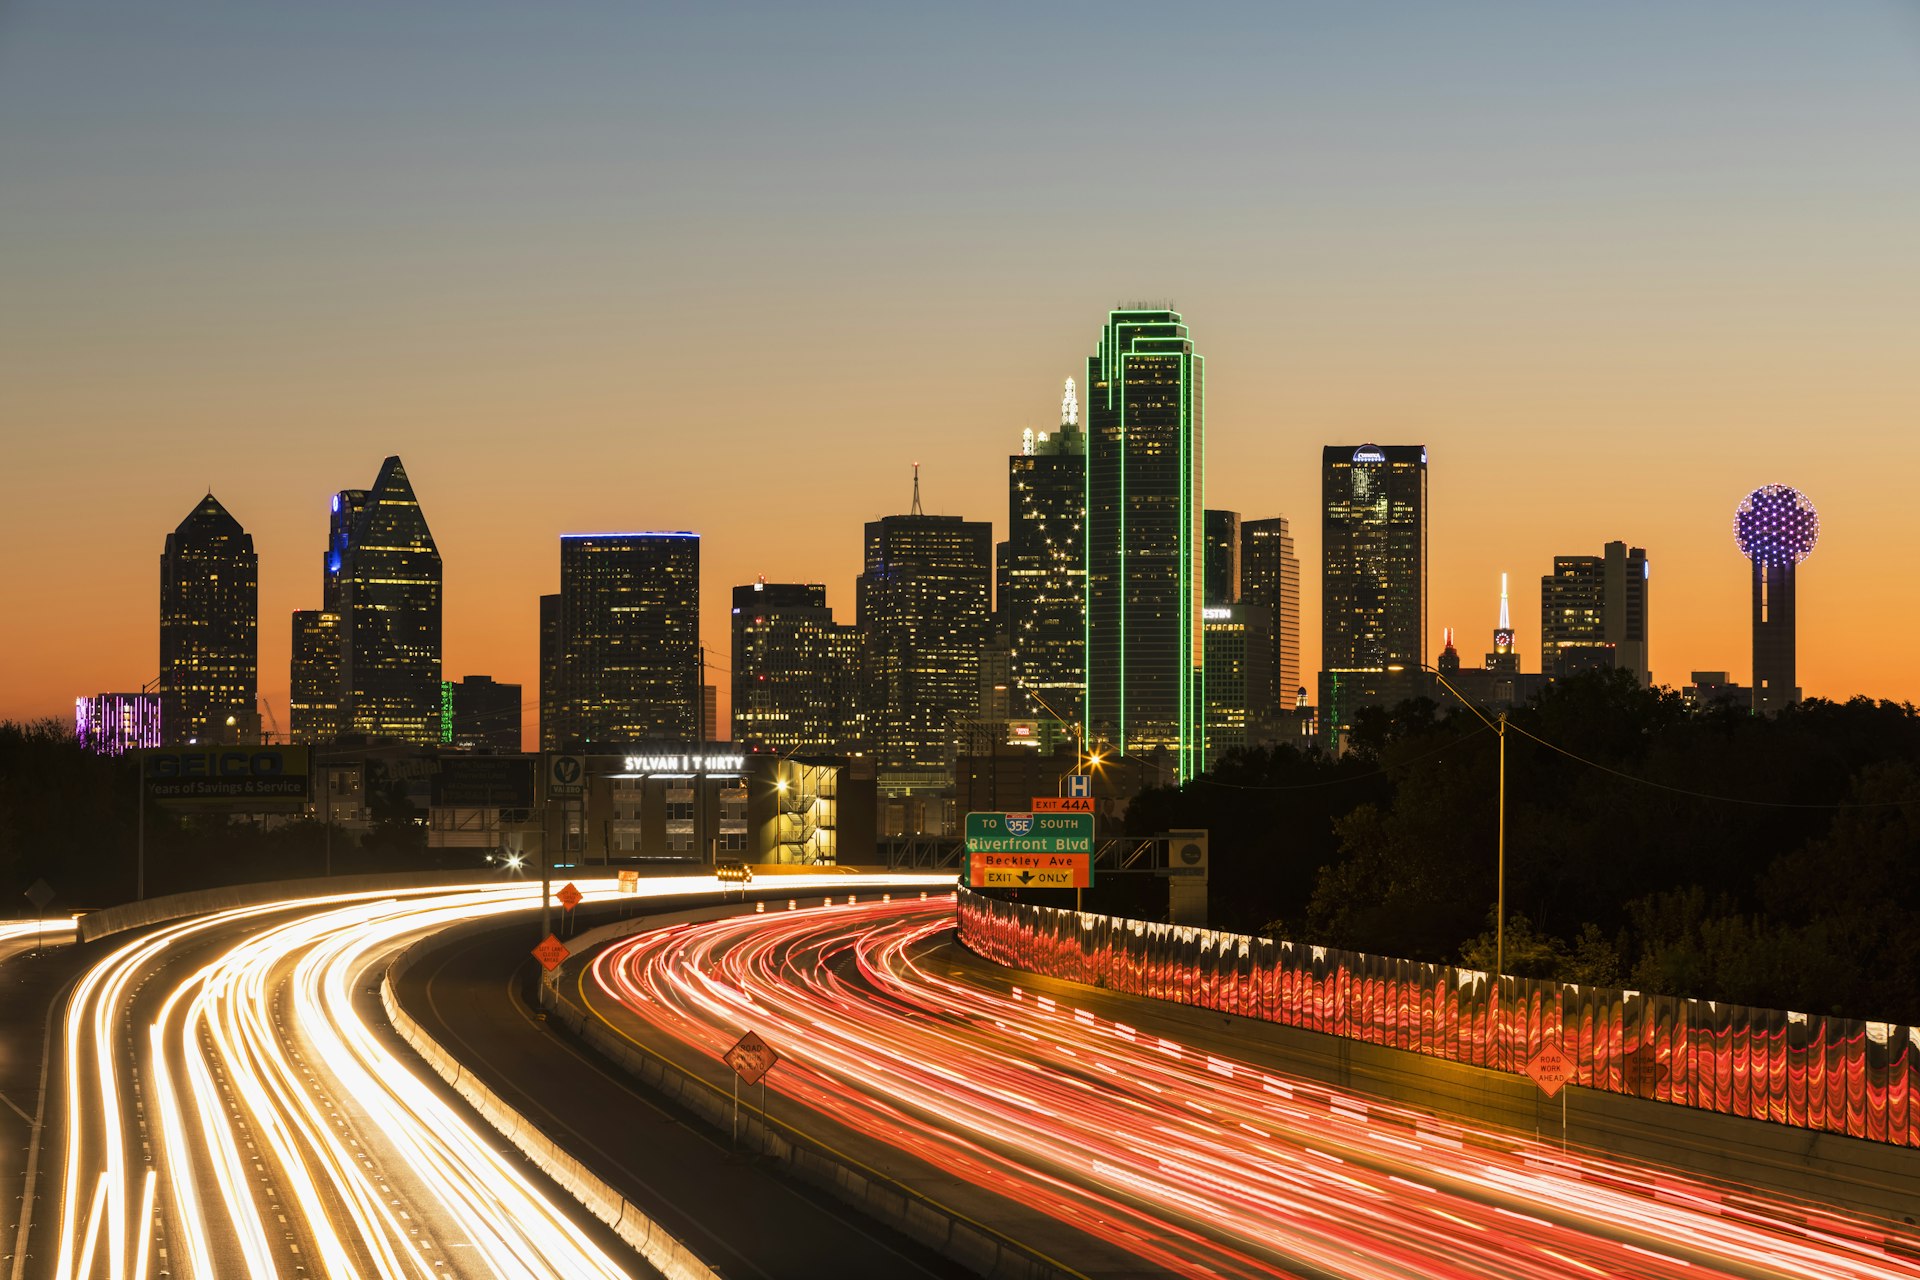 Traffic on the Tom Landry Freeway at night with the Dallas skyline